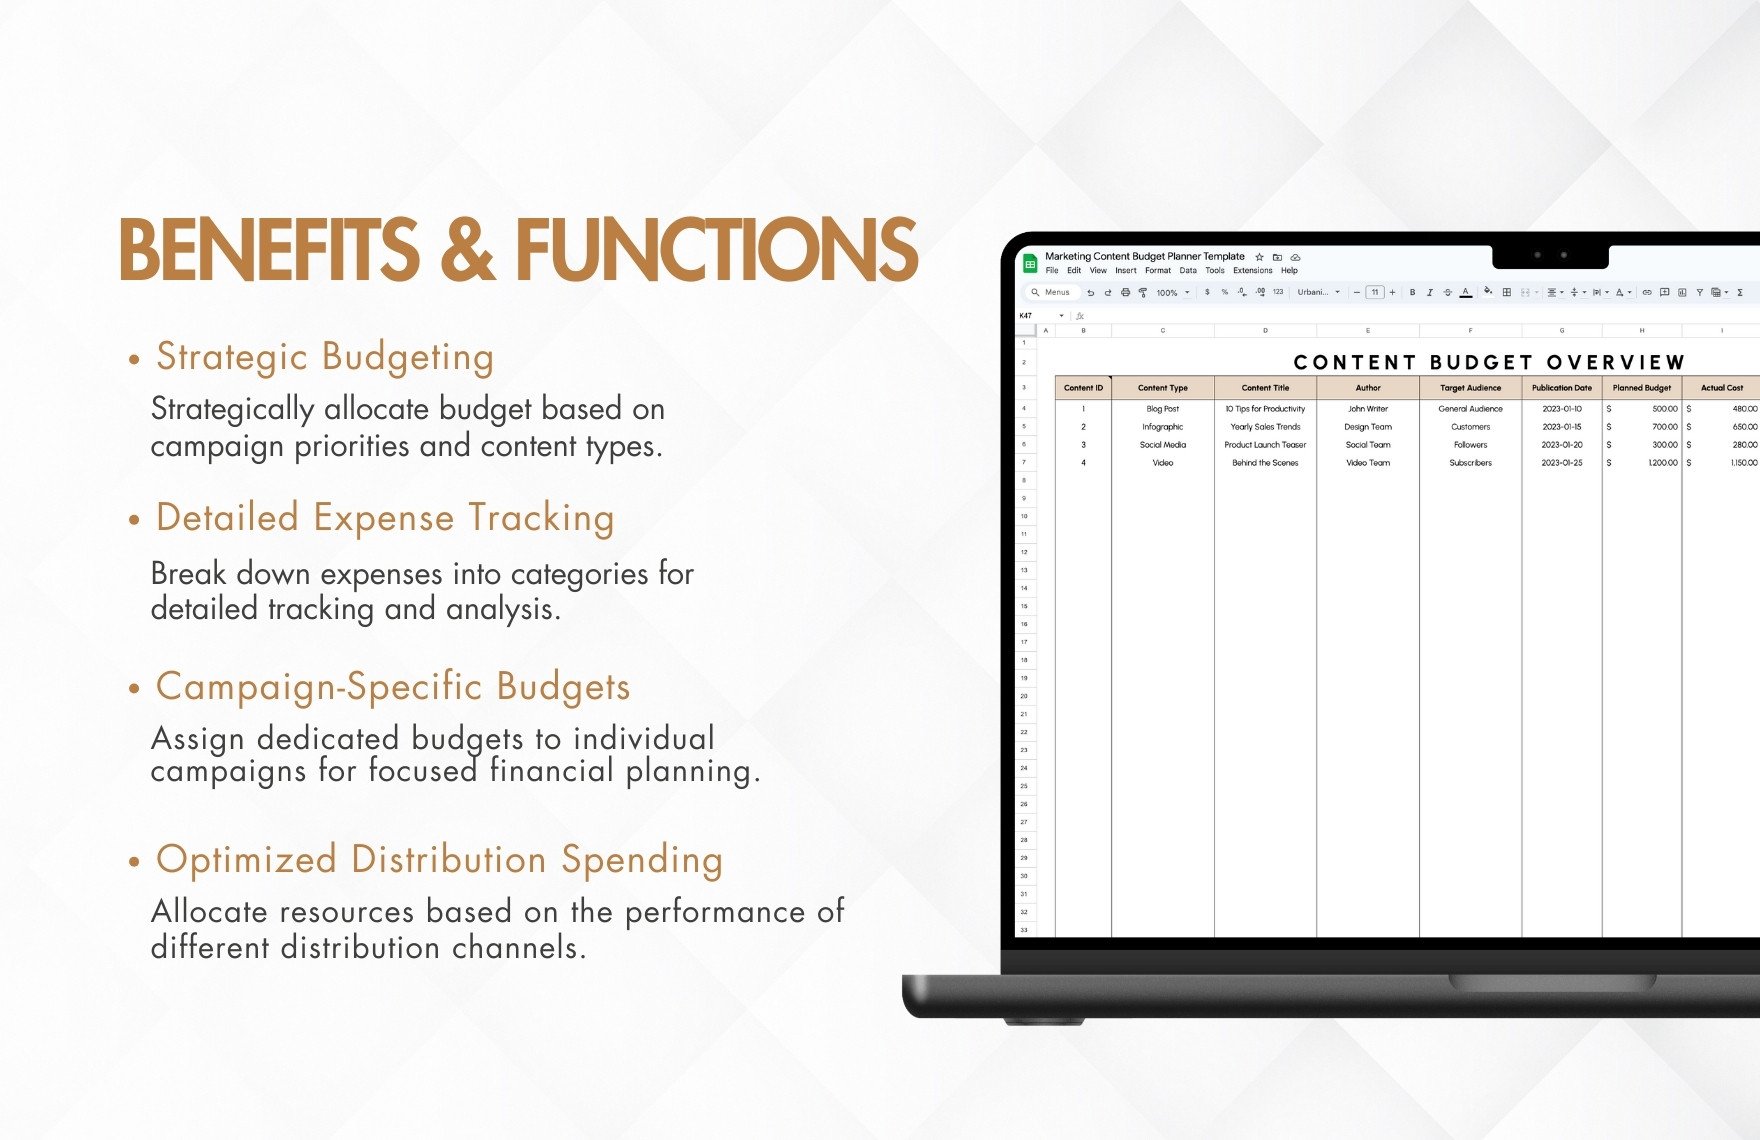 Marketing Content Budget Planner Template